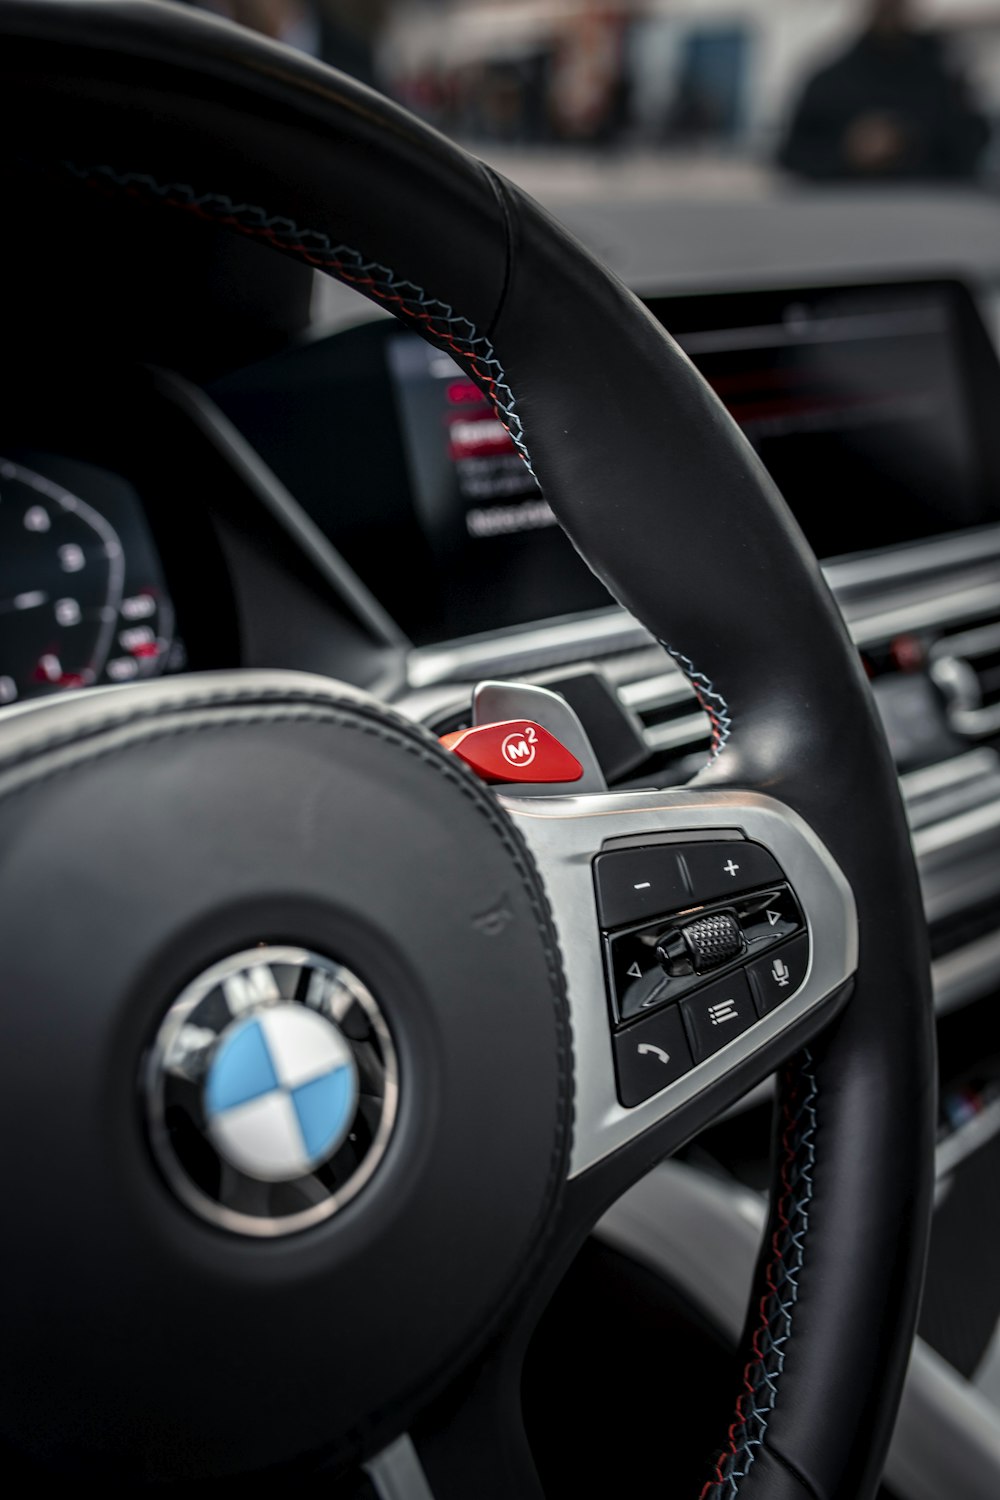 a close up of a steering wheel of a car